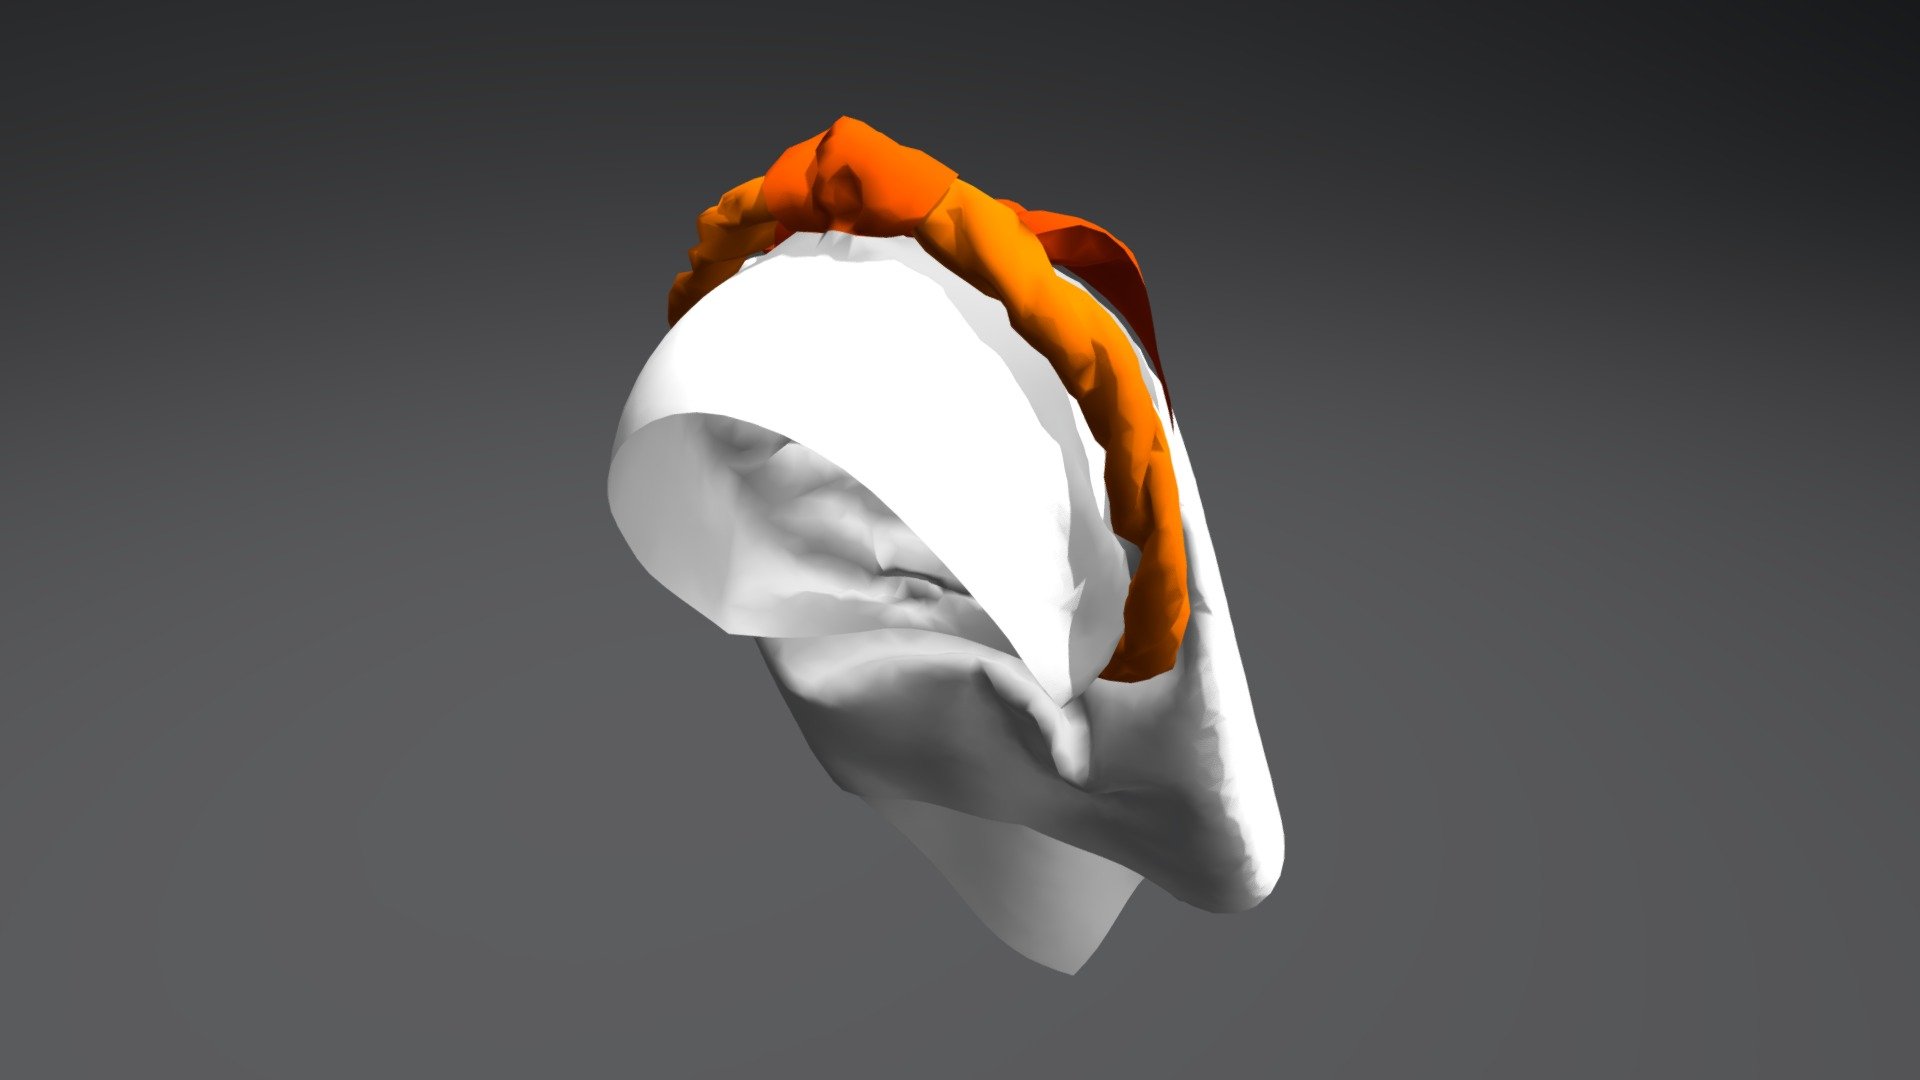 A headscarf, or head scarf, is a scarf covering most or all of the top of a person's, usually women's, hair and head, leaving the face uncovered. A headscarf is formed of a triangular cloth or a square cloth folded into a triangle, with which the head is covered.

*1 model (medium poly) with materials 3d model